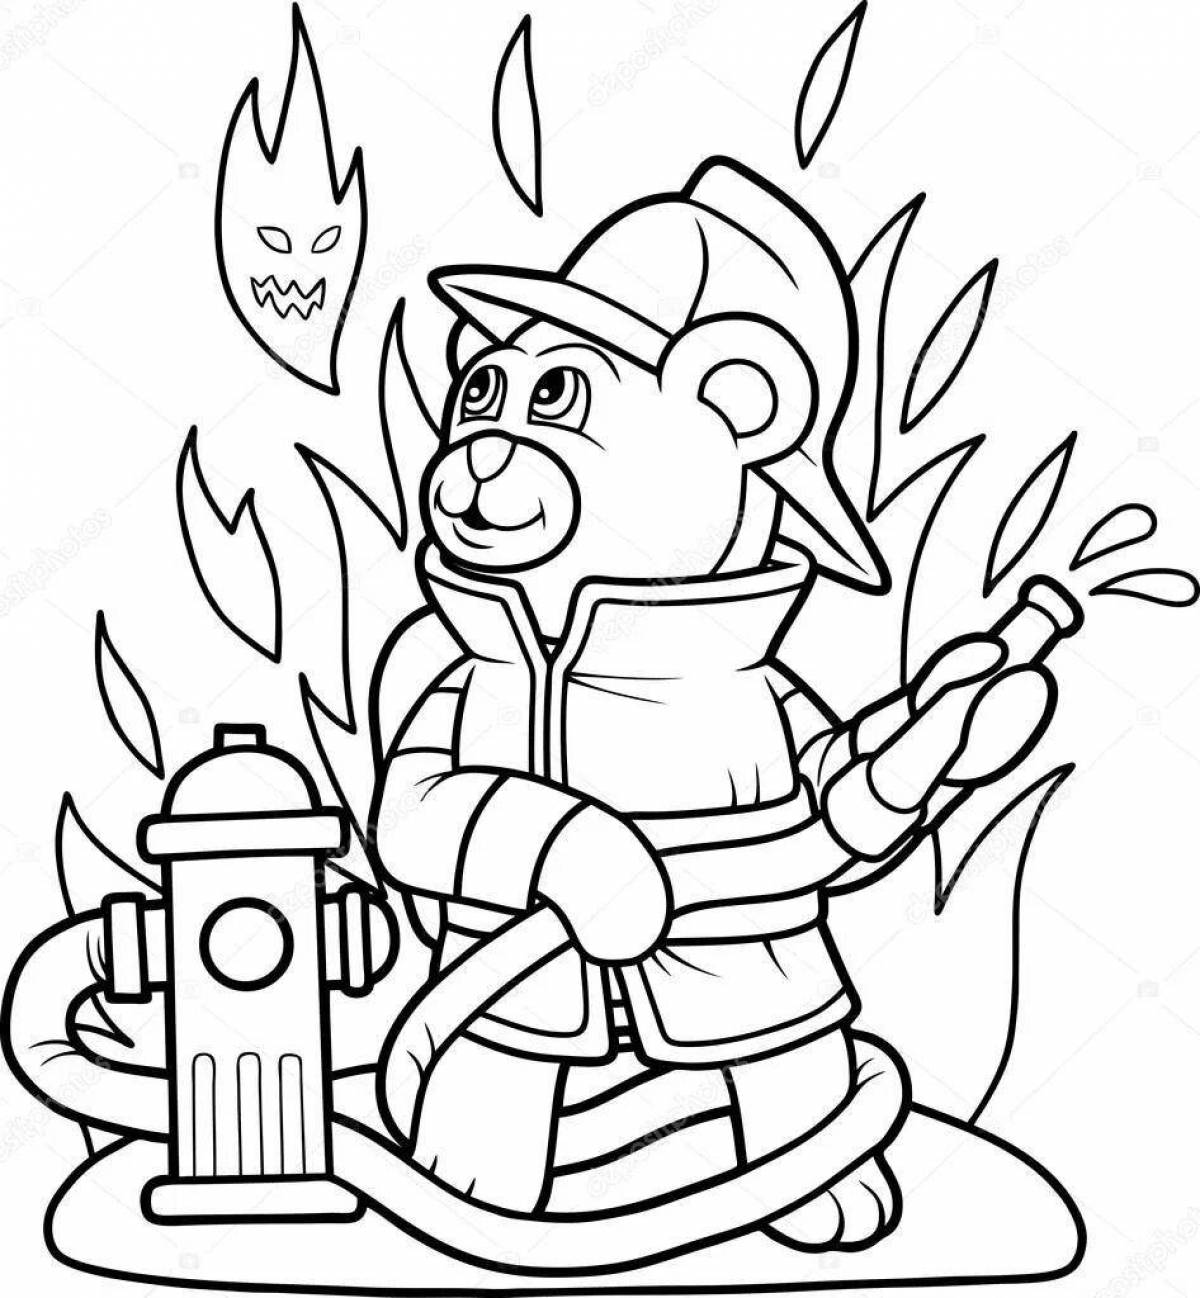 Fun drawing of fire safety